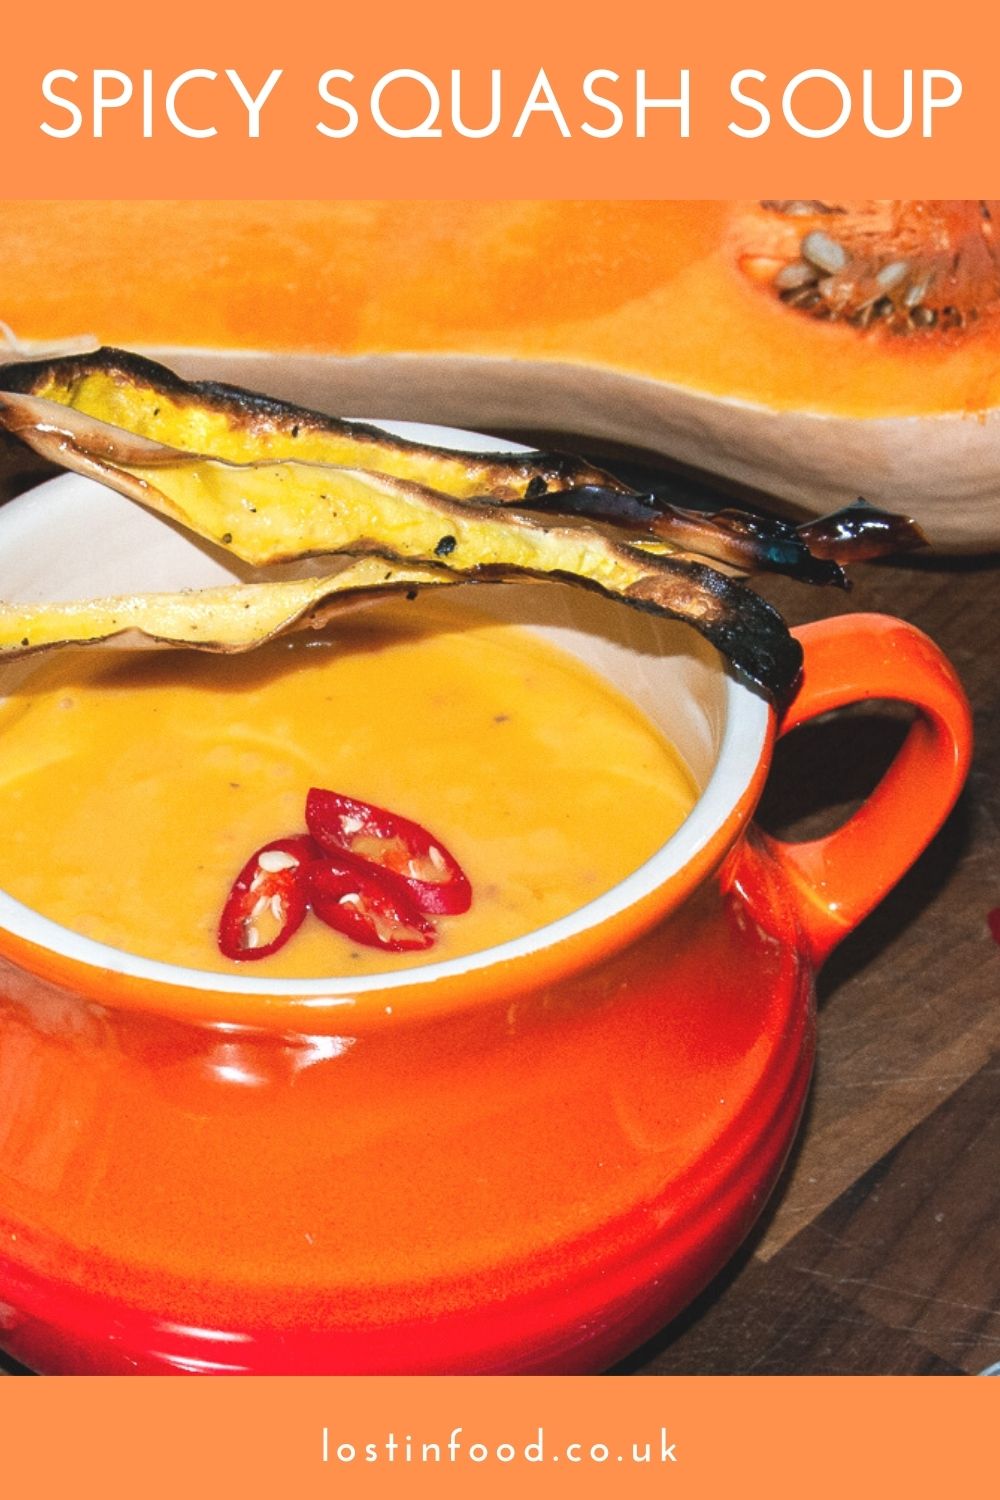 Vibrant squash soup with added chillis served in an orange cauldron style bowl.